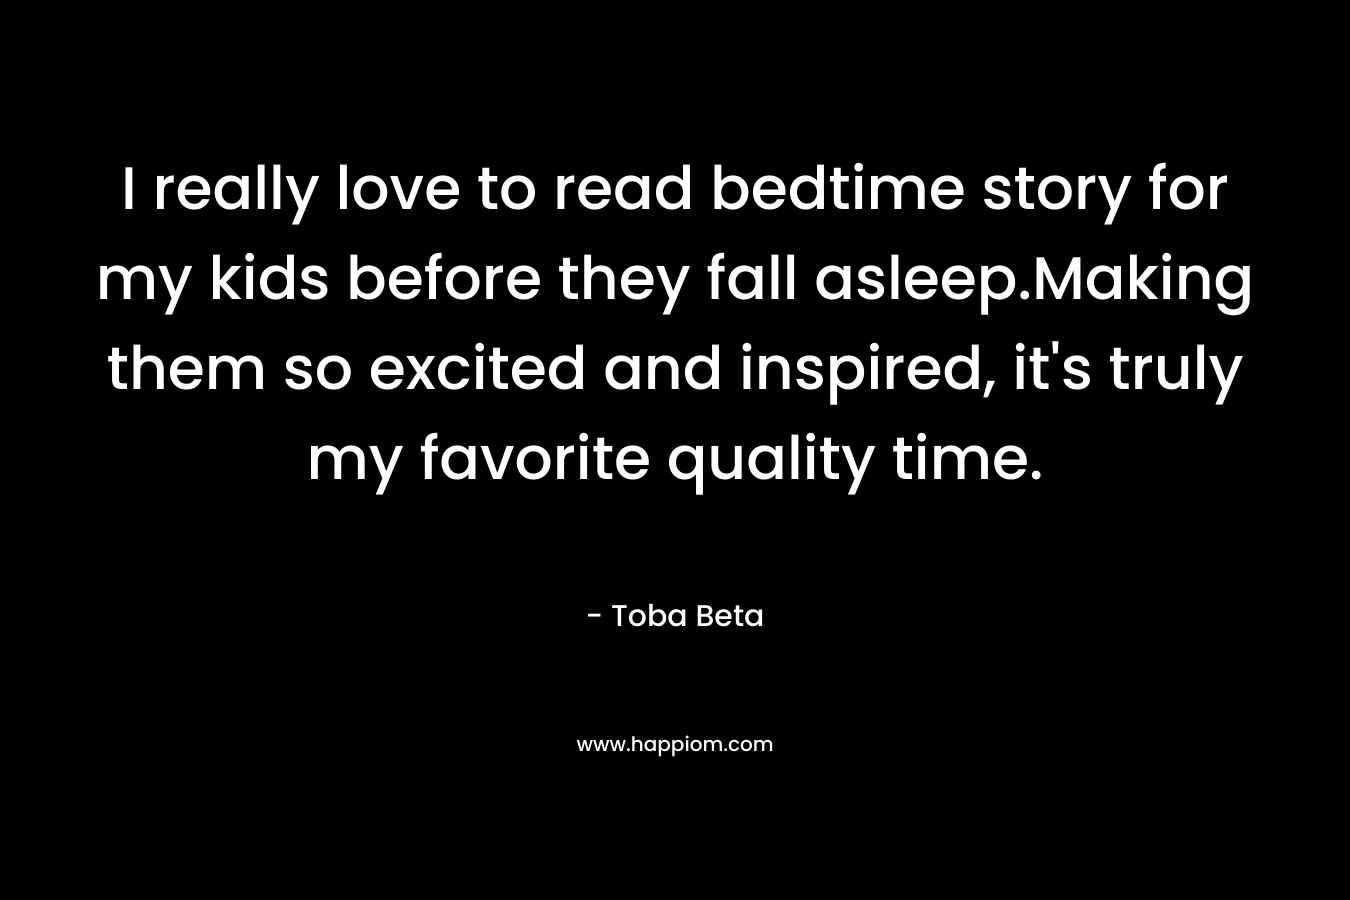 I really love to read bedtime story for my kids before they fall asleep.Making them so excited and inspired, it’s truly my favorite quality time. – Toba Beta